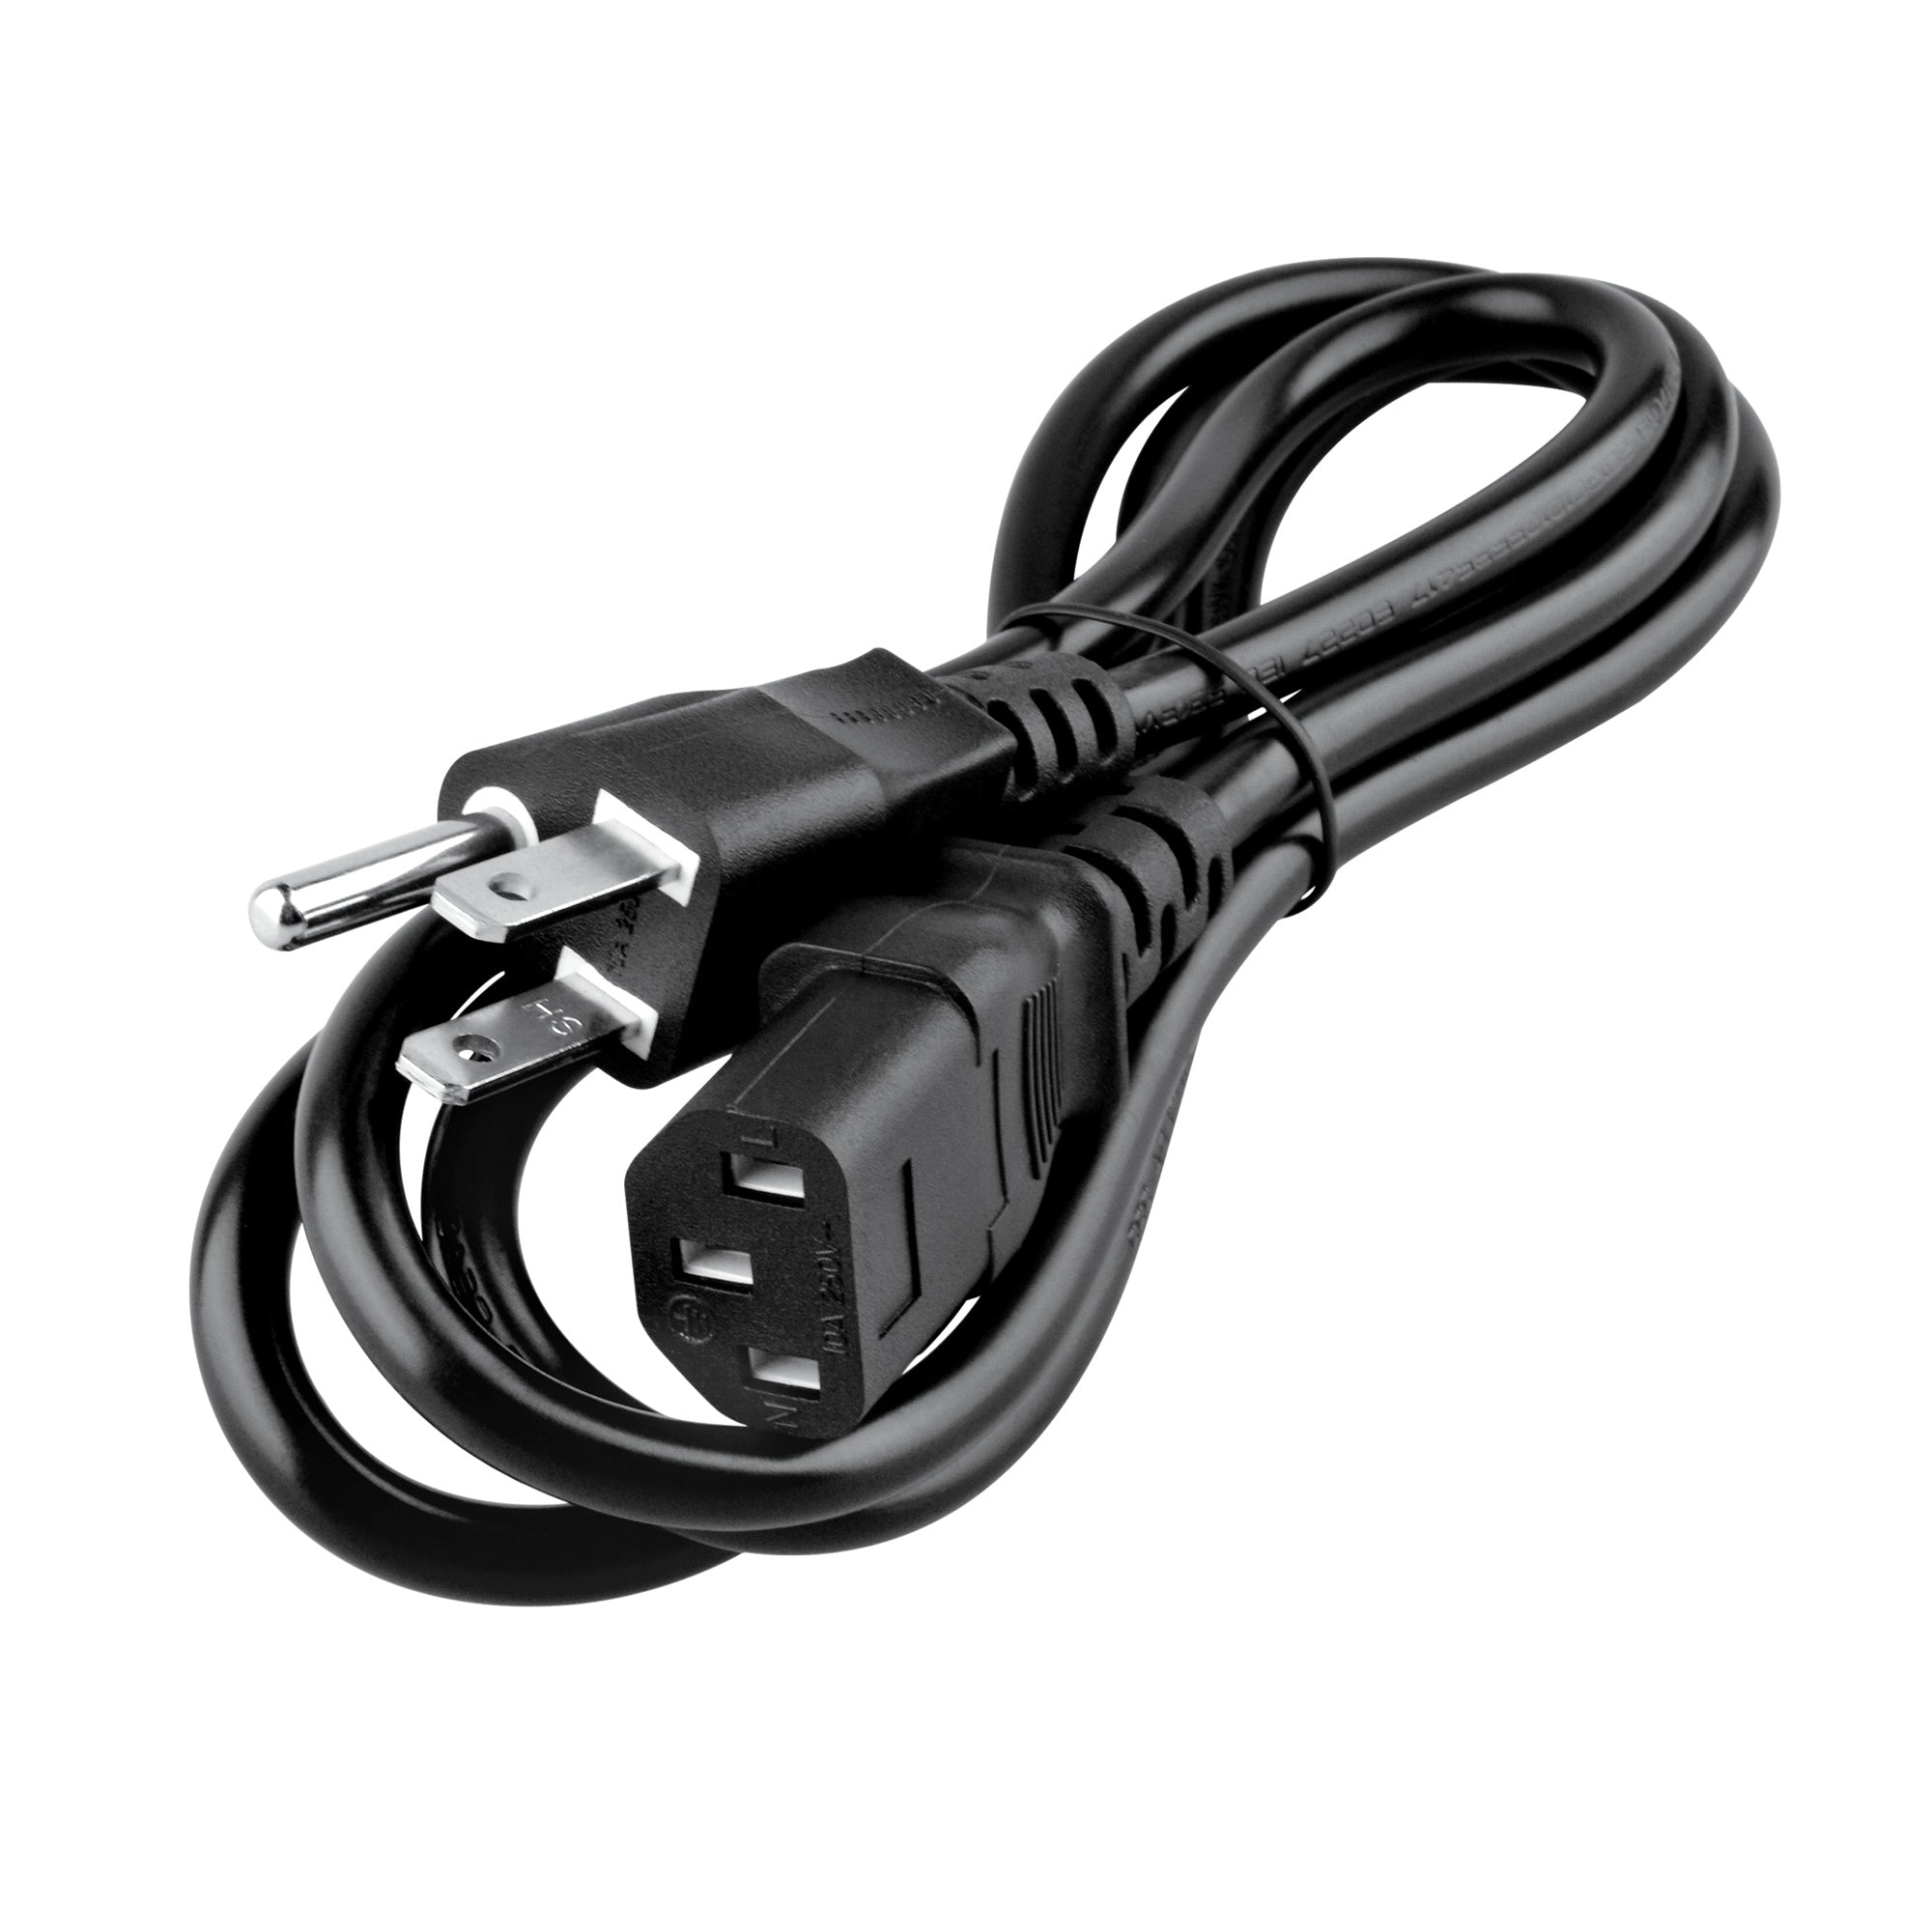 AbleGrid 5ft AC Power Cord Cable Compatible with Allen & Heath PL-9 7 Way PL ANET HUB Extender?